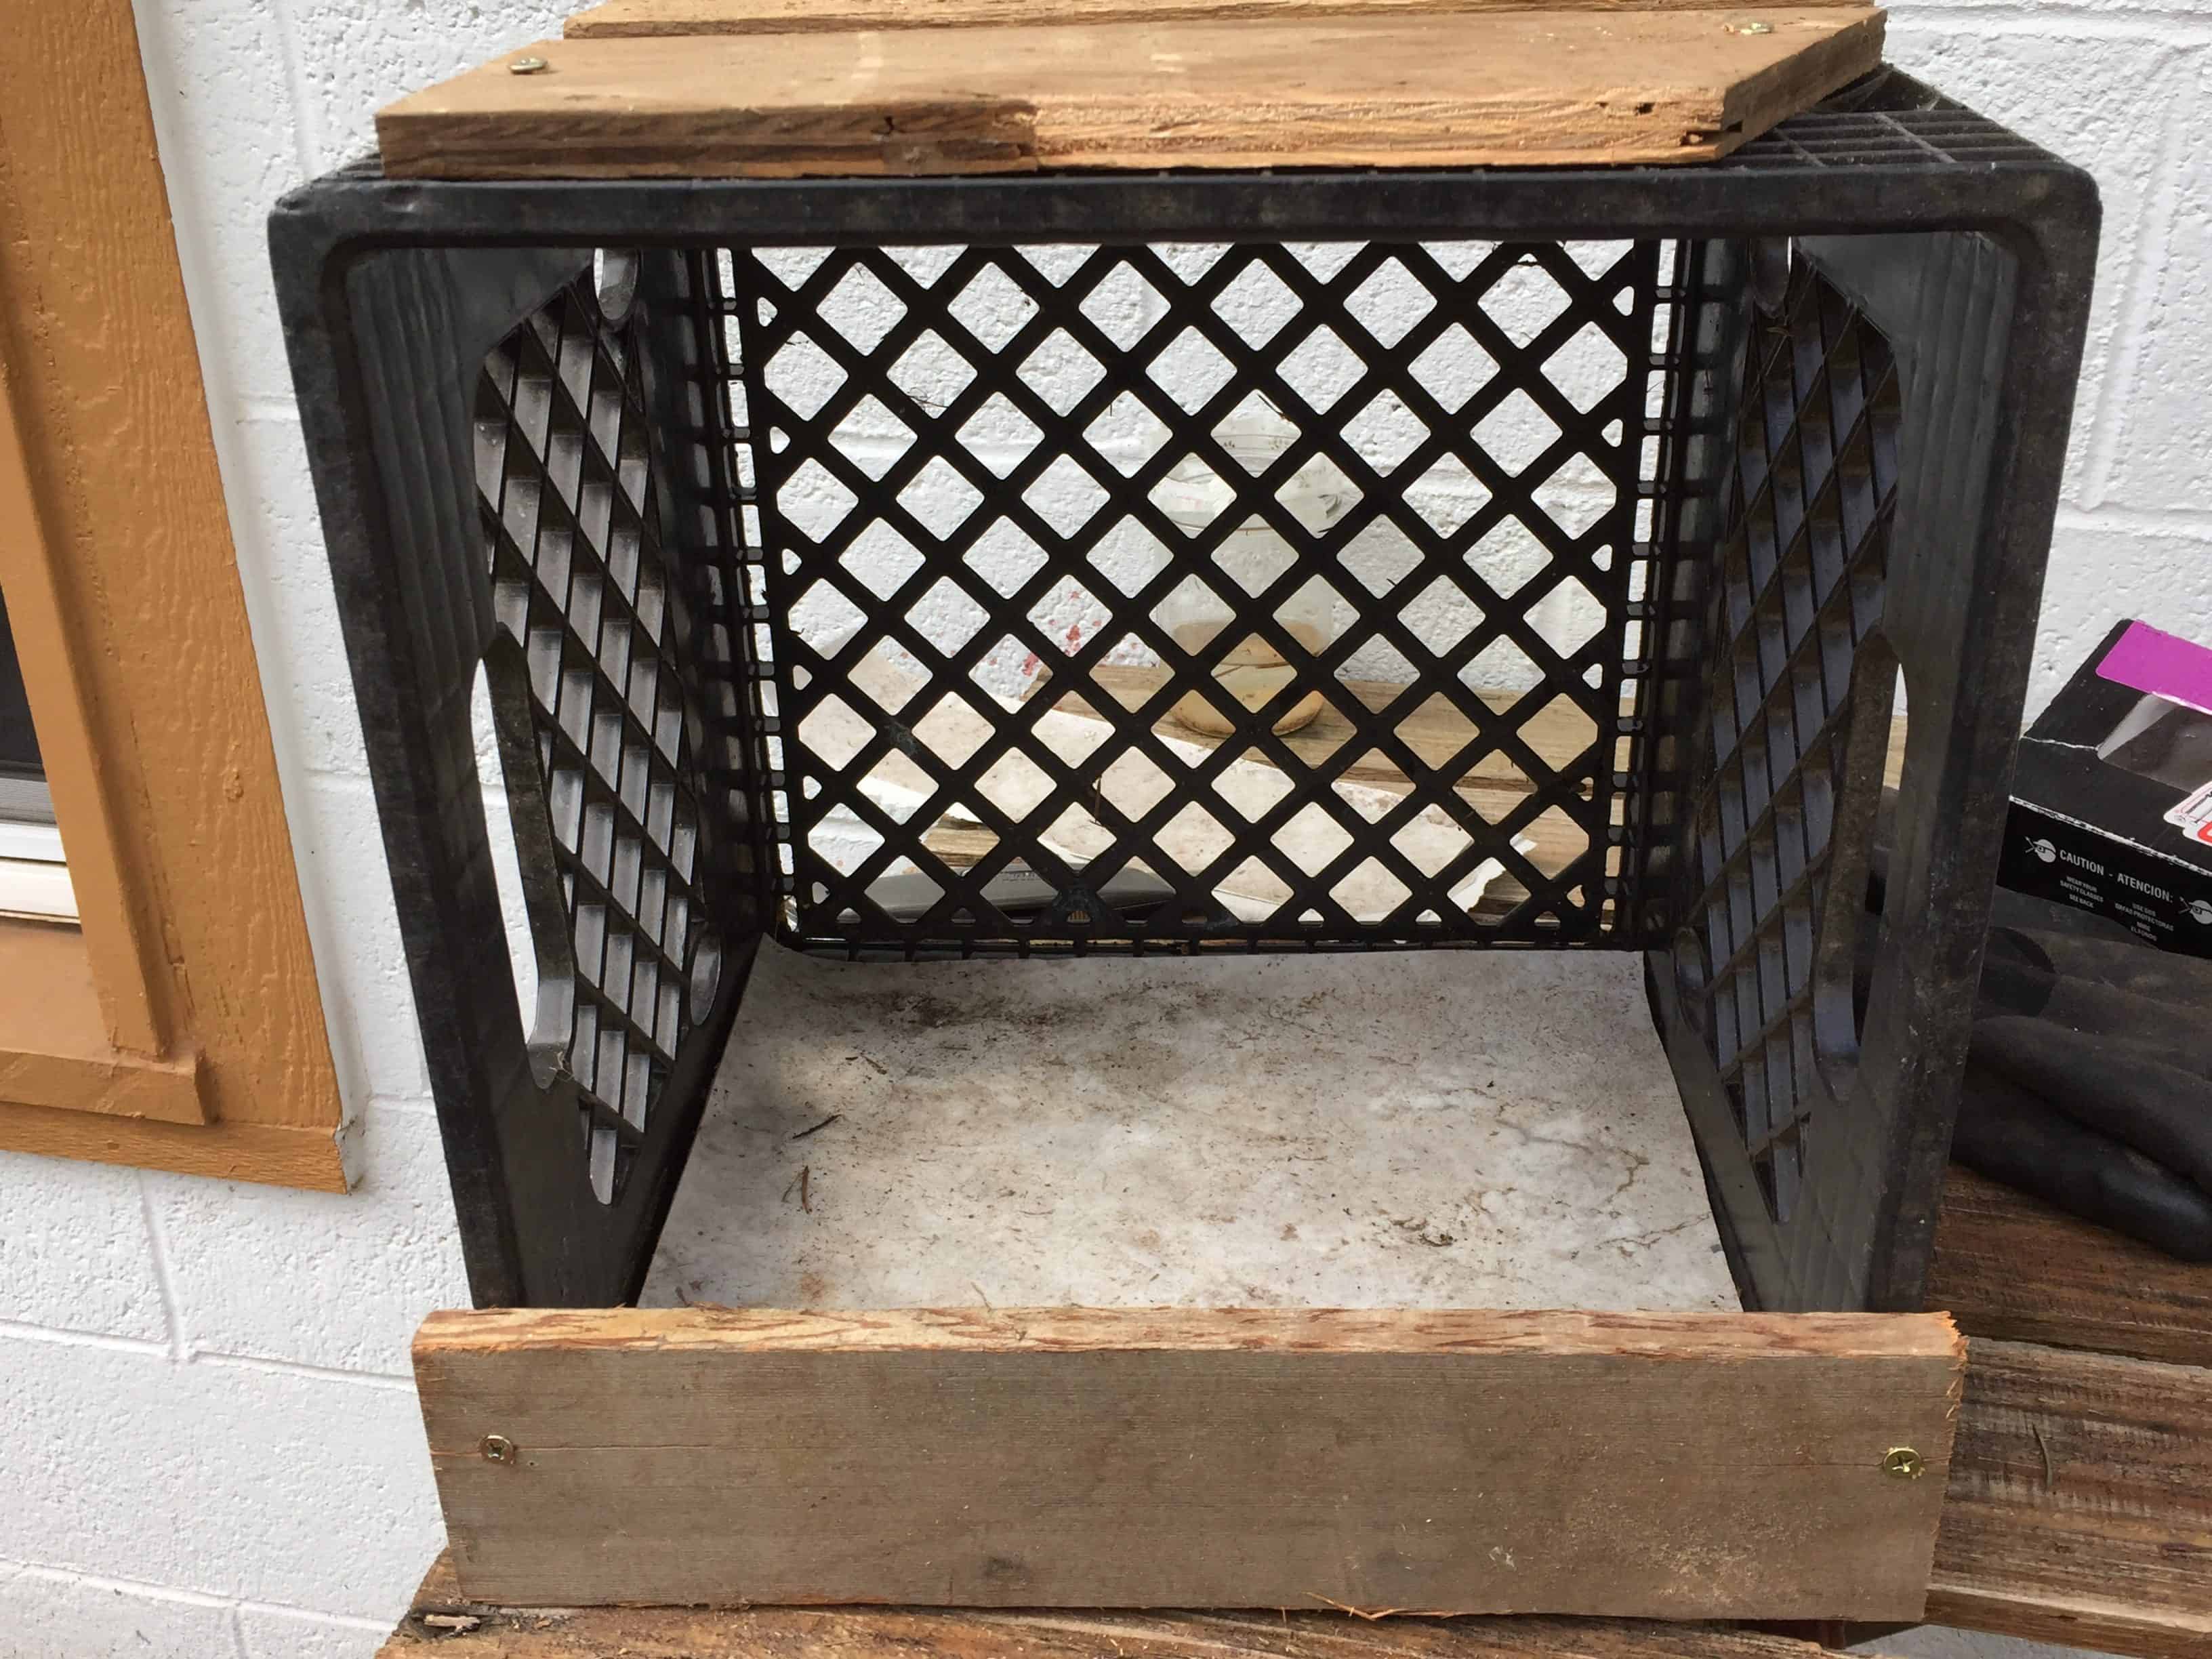 Make a nest box out of a milk crate in just a few minutes and a few scraps!